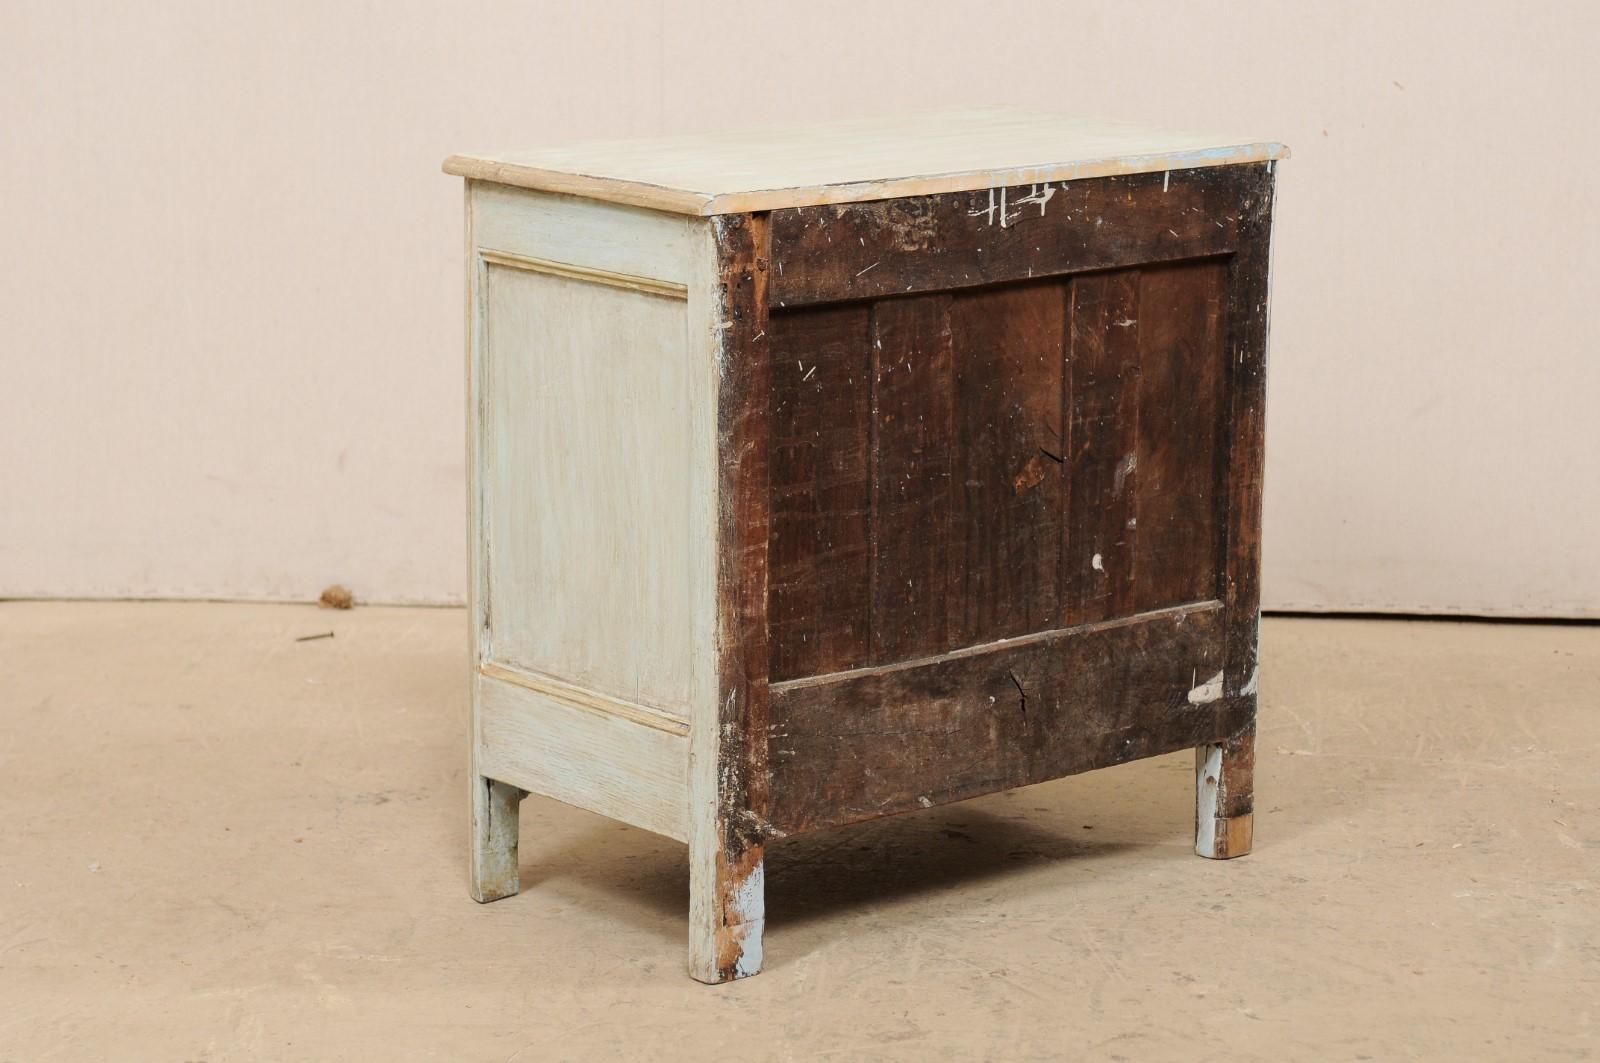 French Petite-Sized Commode in Pale Blue from the Turn of the 18th & 19th C. 6